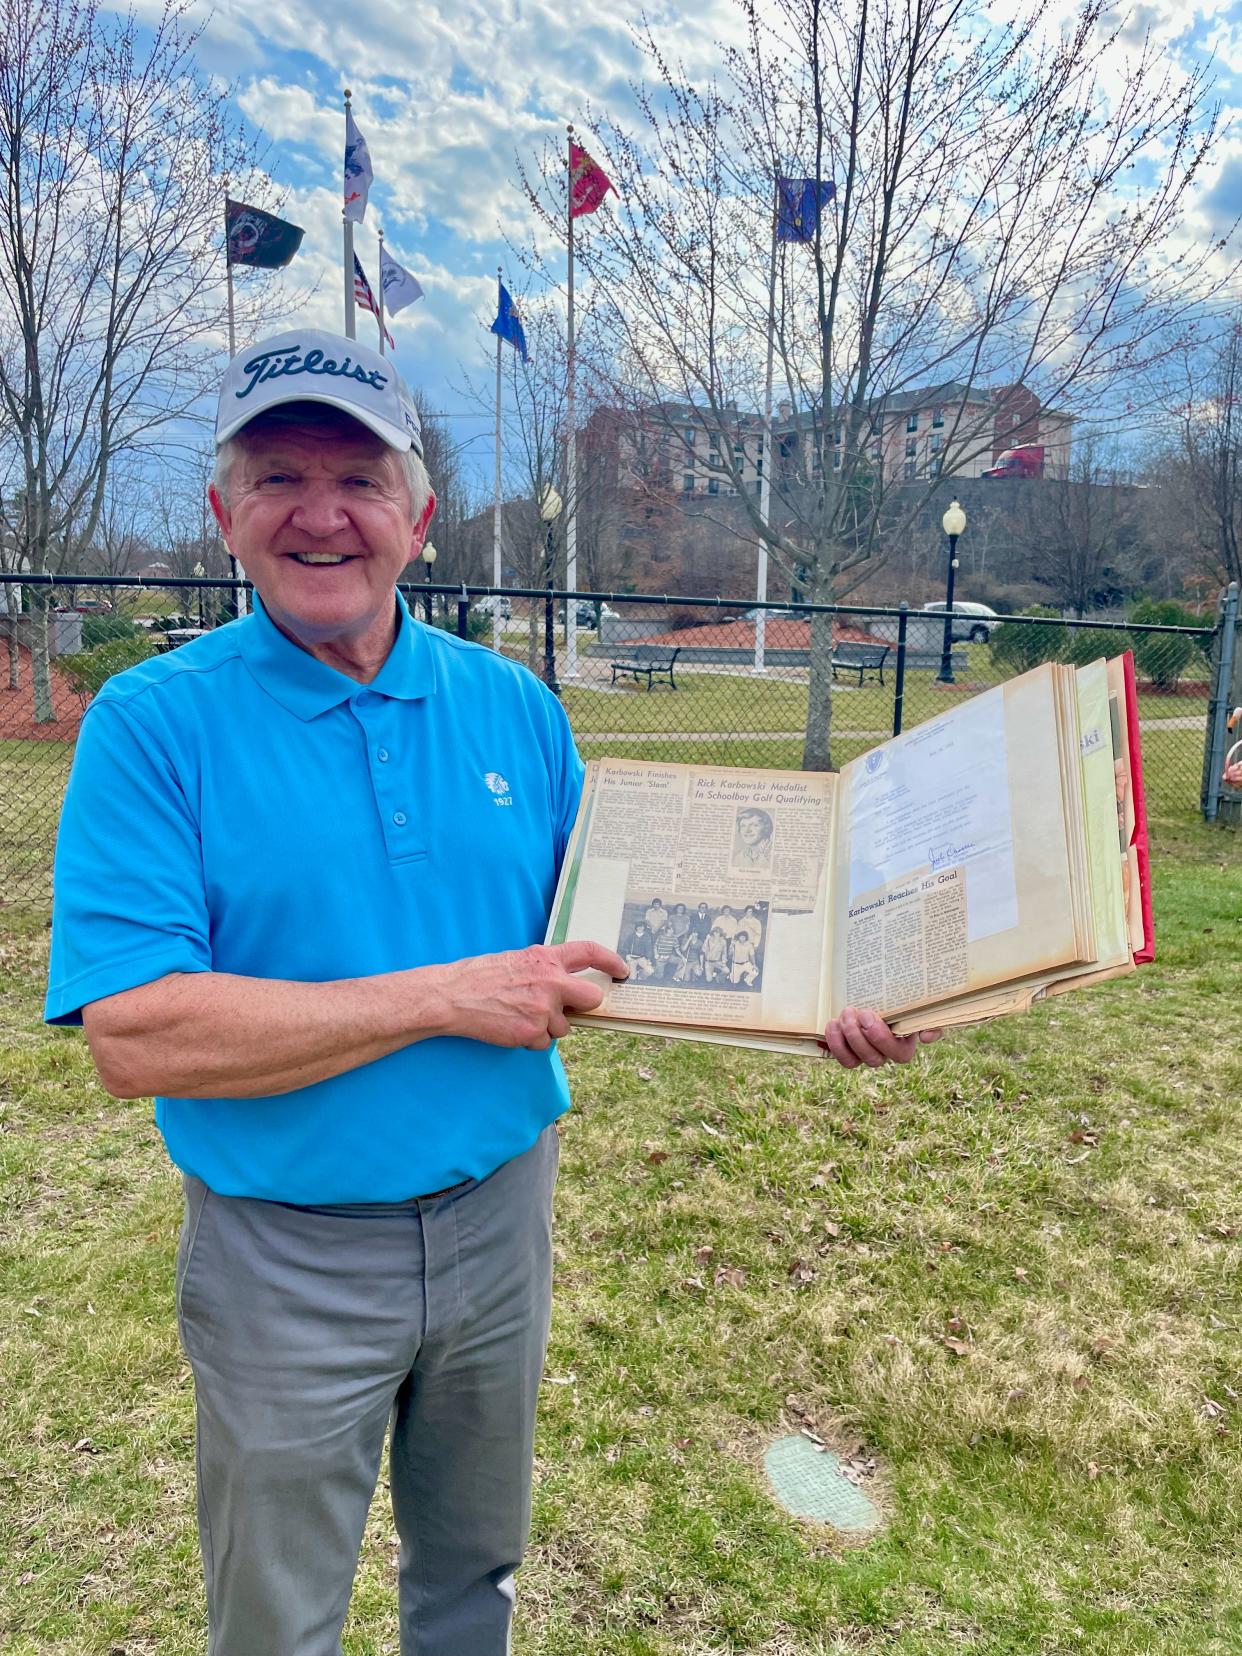 At Auburn Driving Range, Rick Karbowski points to photo of his 1973 Auburn High School state championship golf team in scrapbook his mother kept.